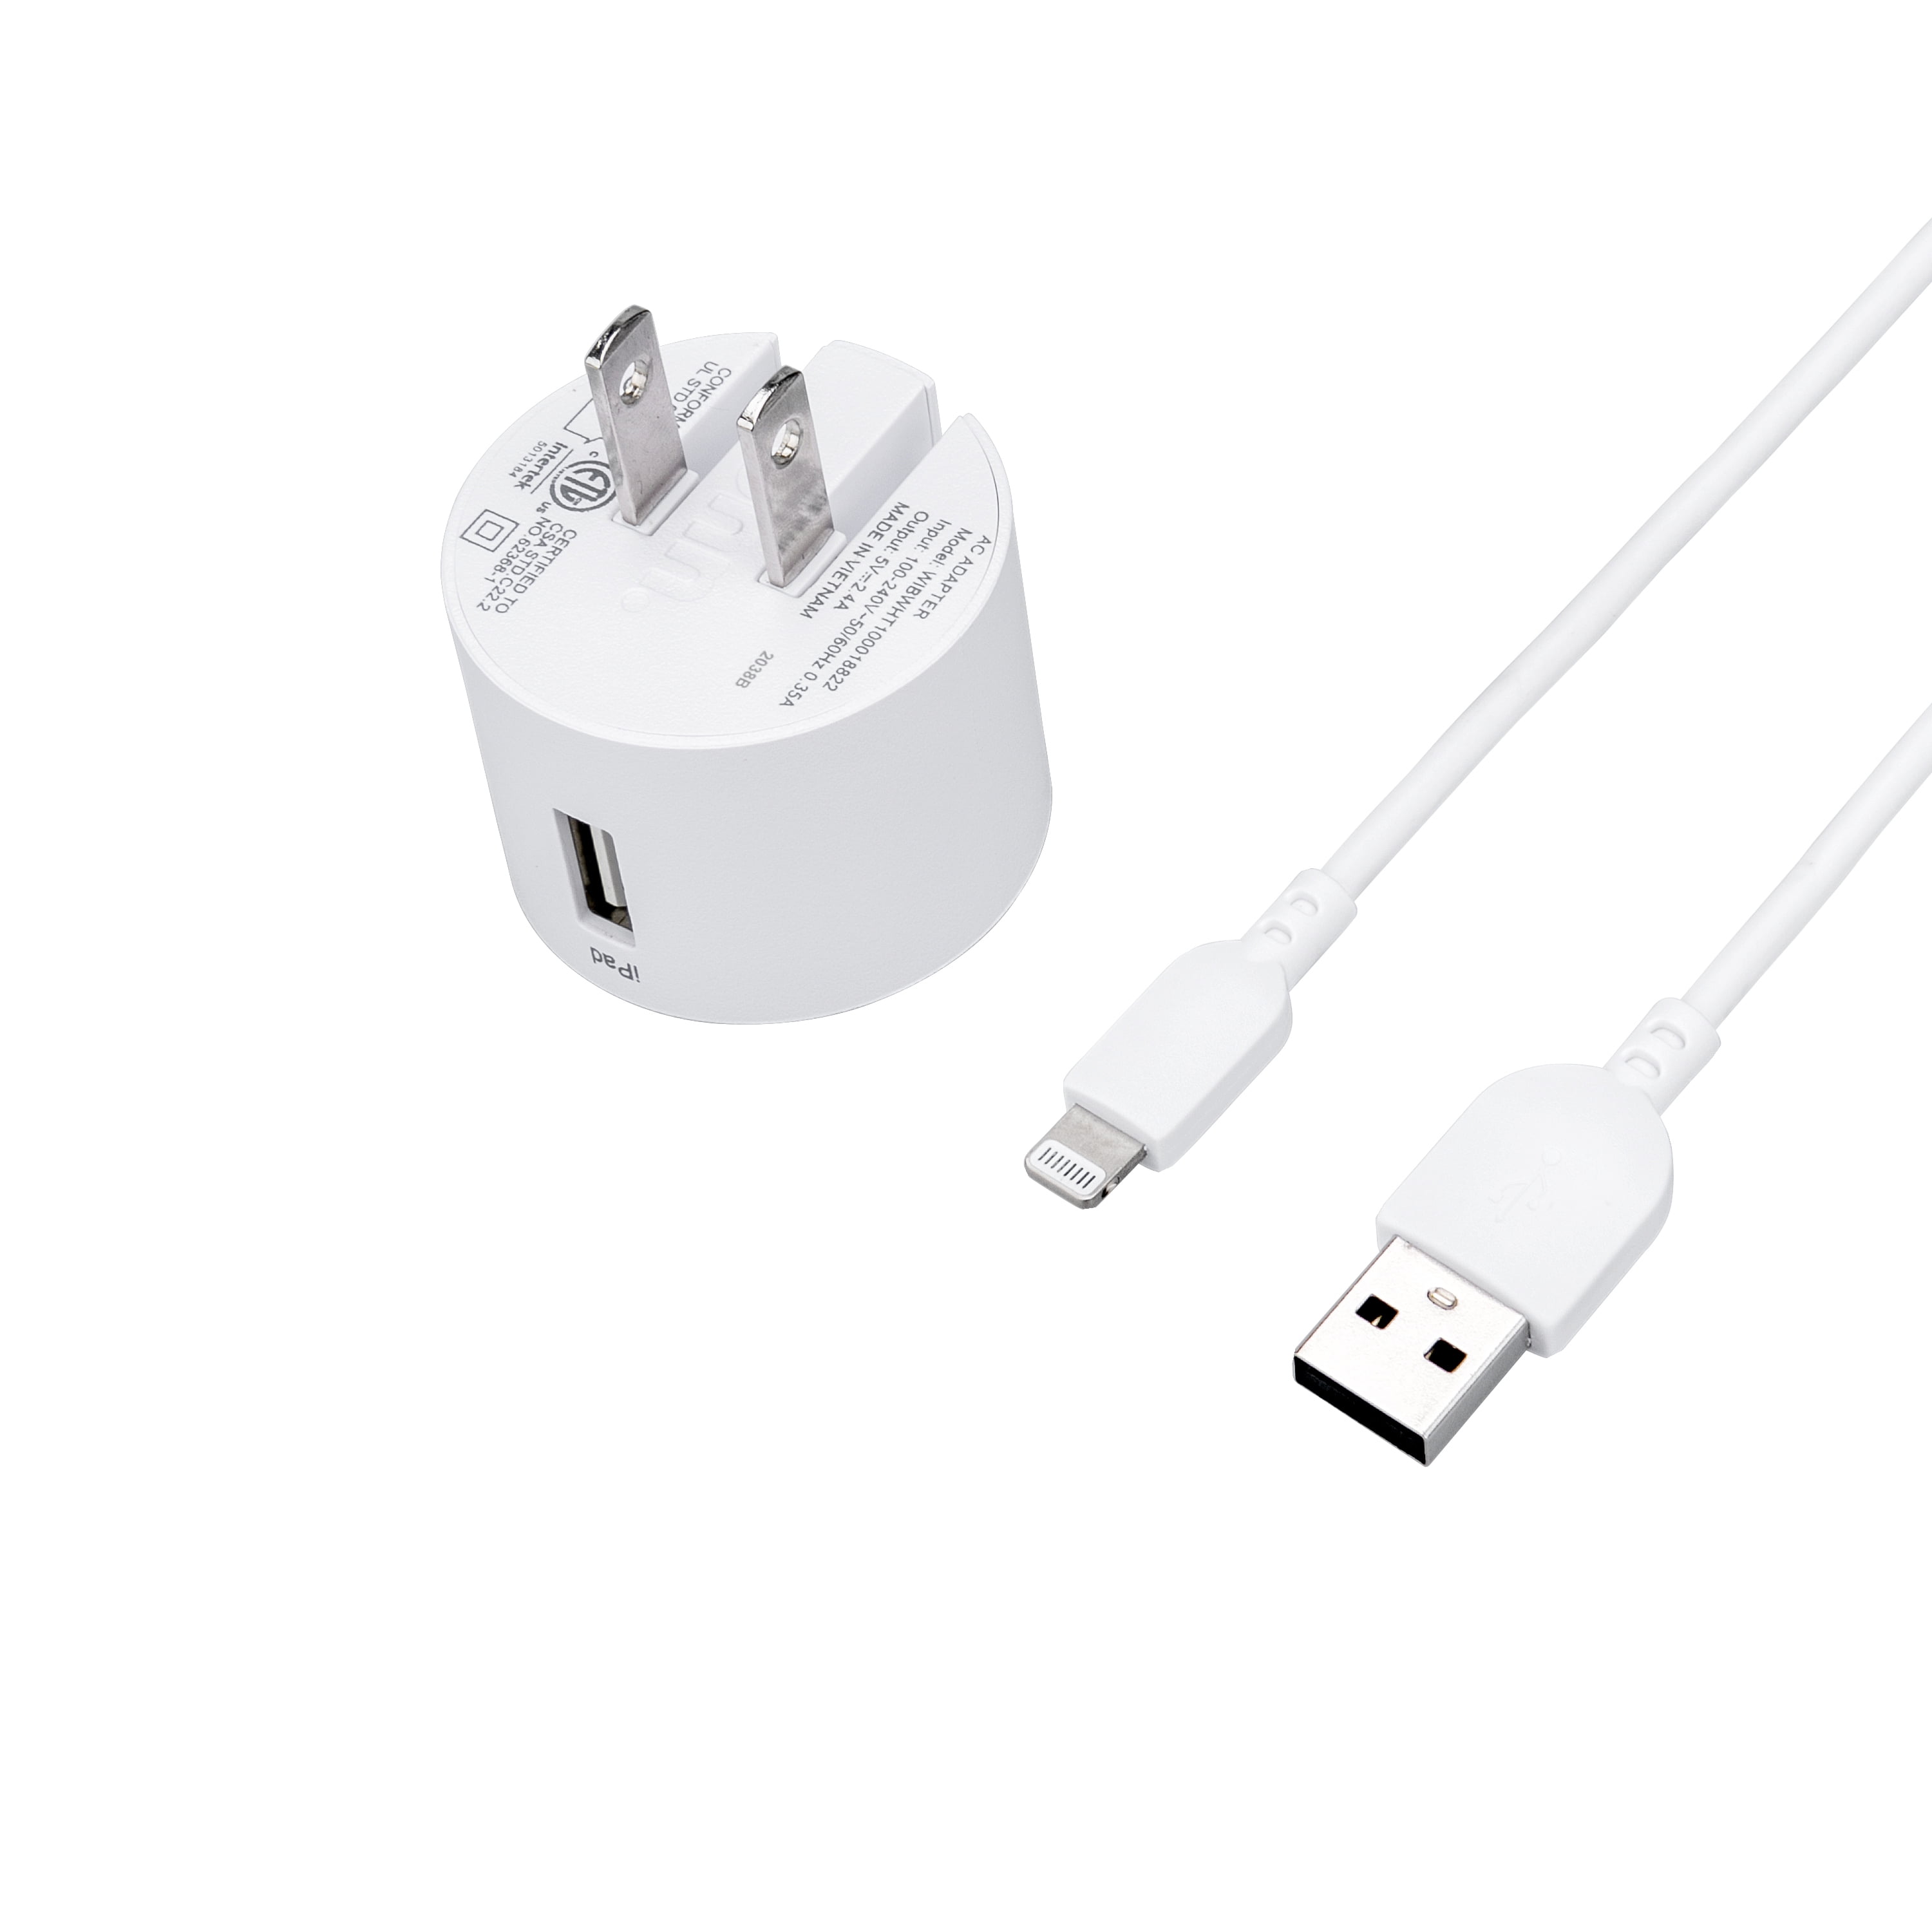 onn. Wall Charging Kit with Lightning to USB Cable, White